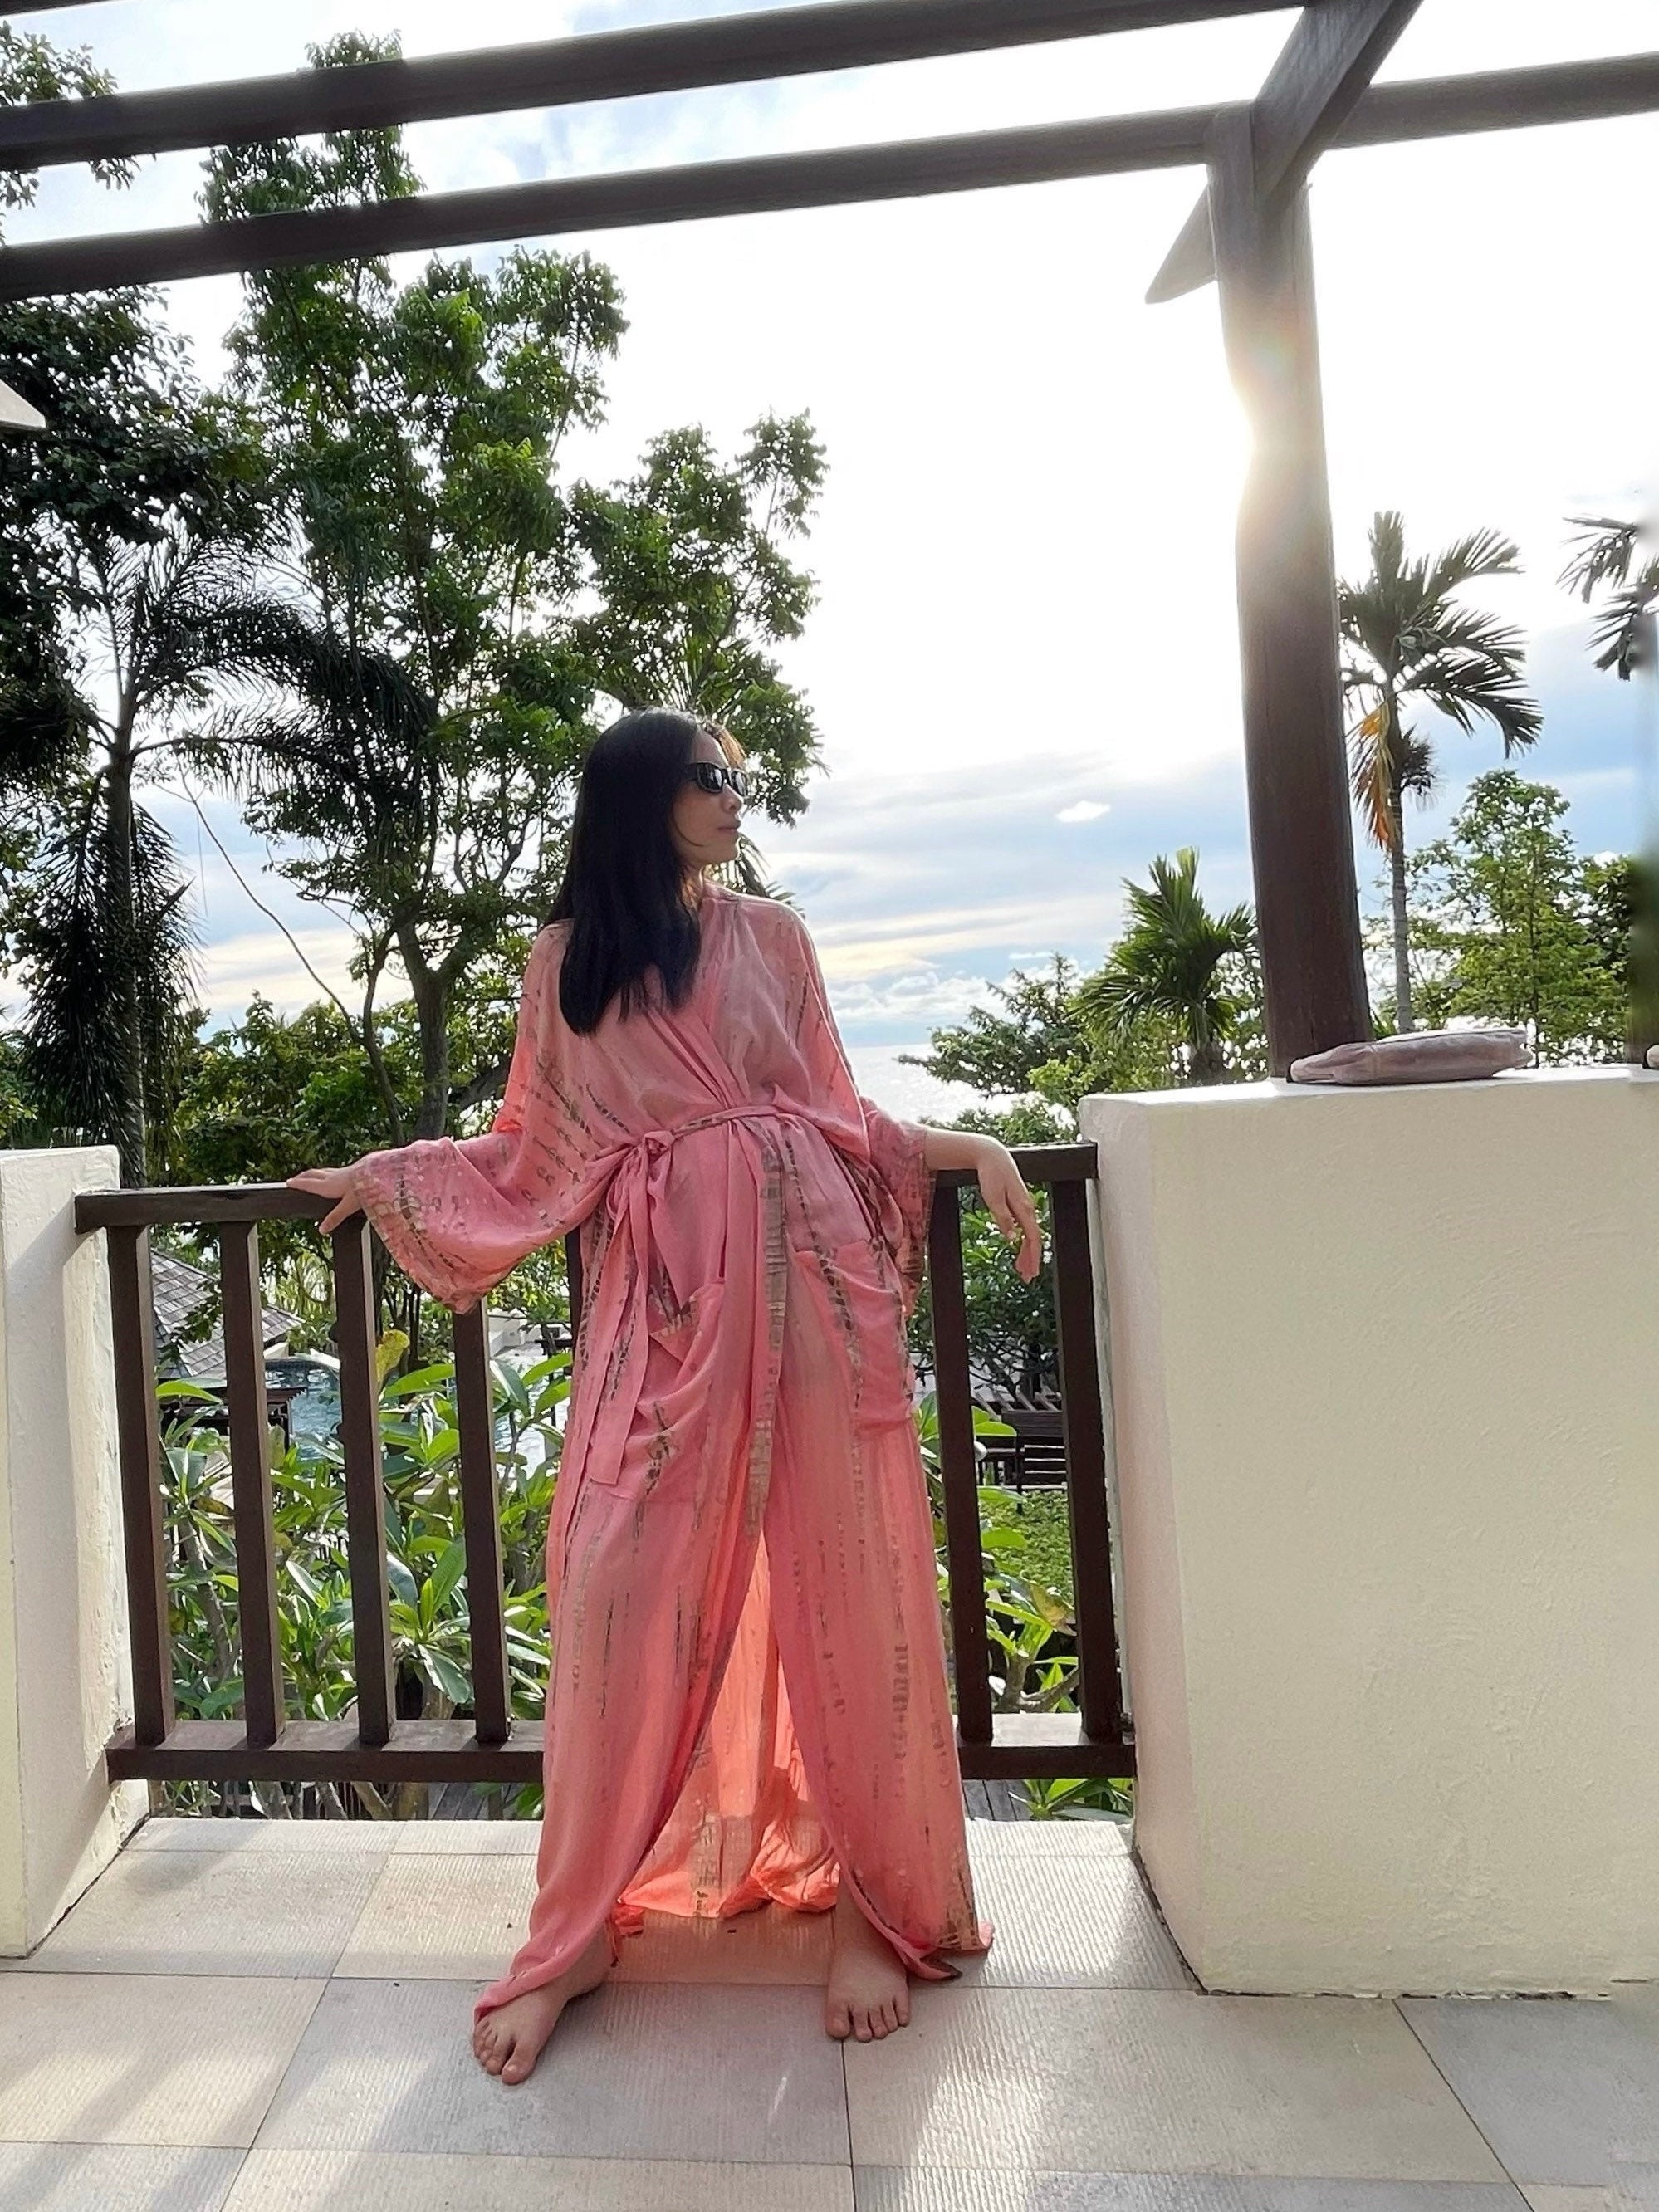 Shop the comfort Pink Tie Dye Kimono Robe handmade sustainable clothing by coco de chom?